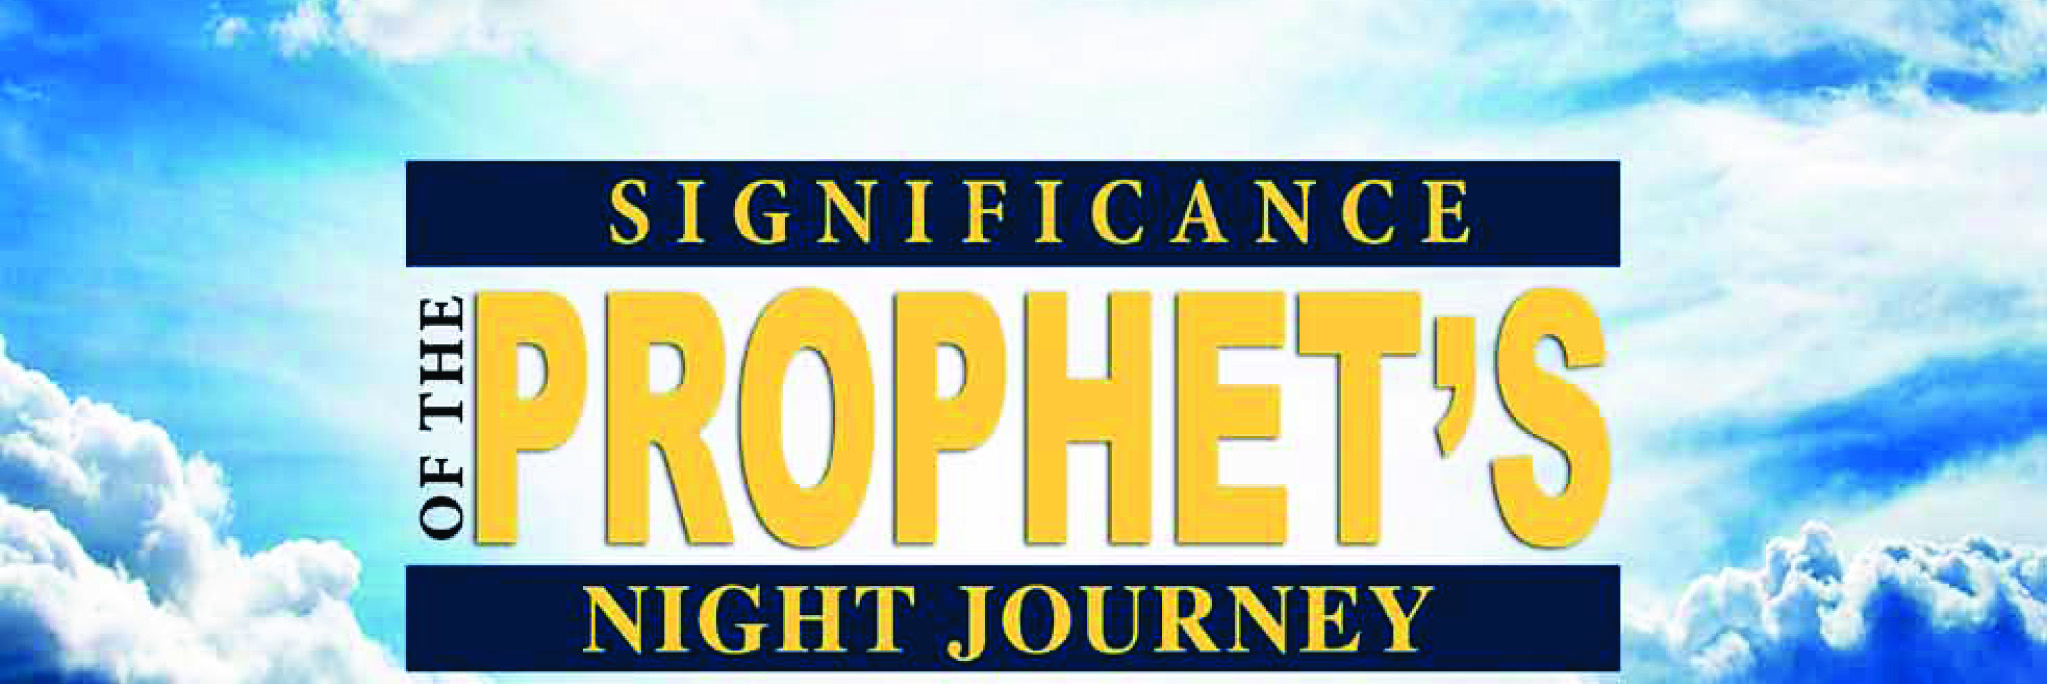 significance of the prophets night journey